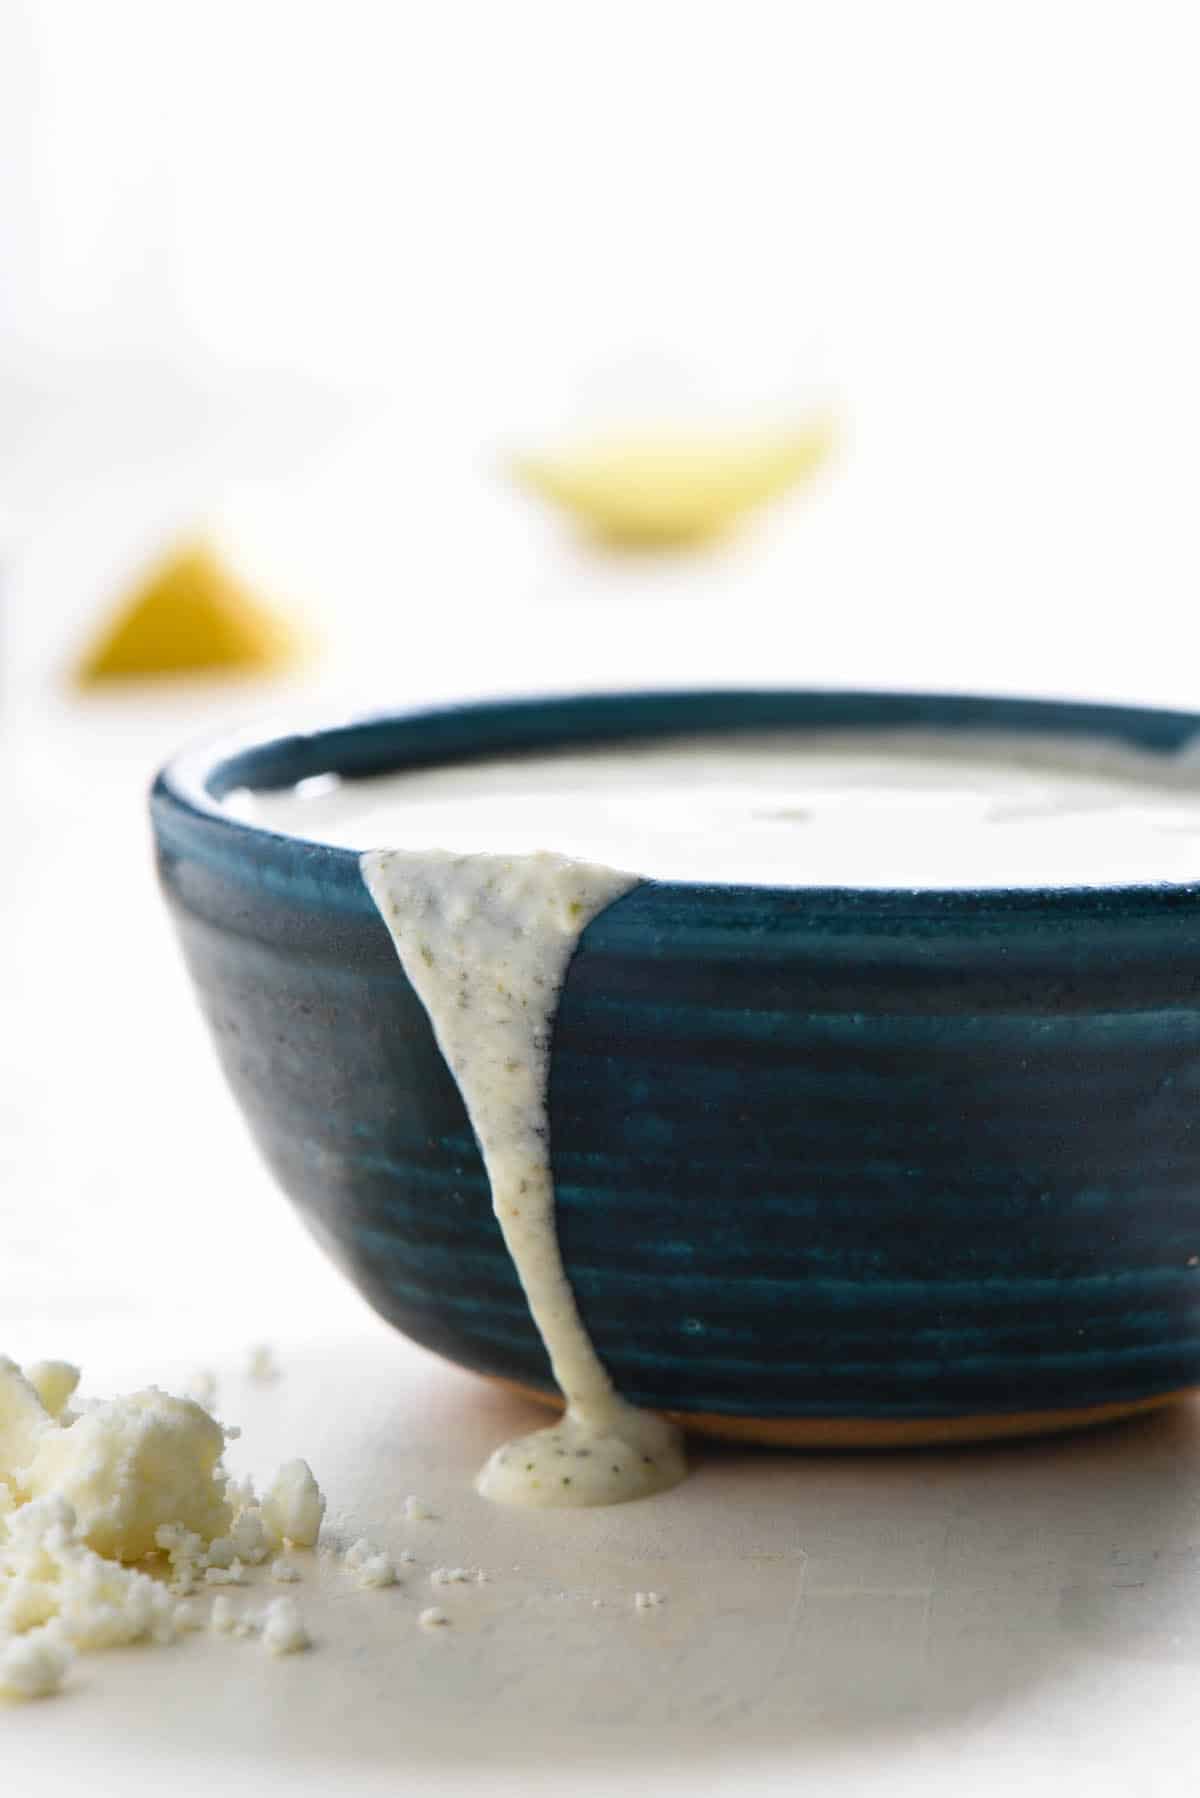 A small blue bowl overflowing with a white sauce.